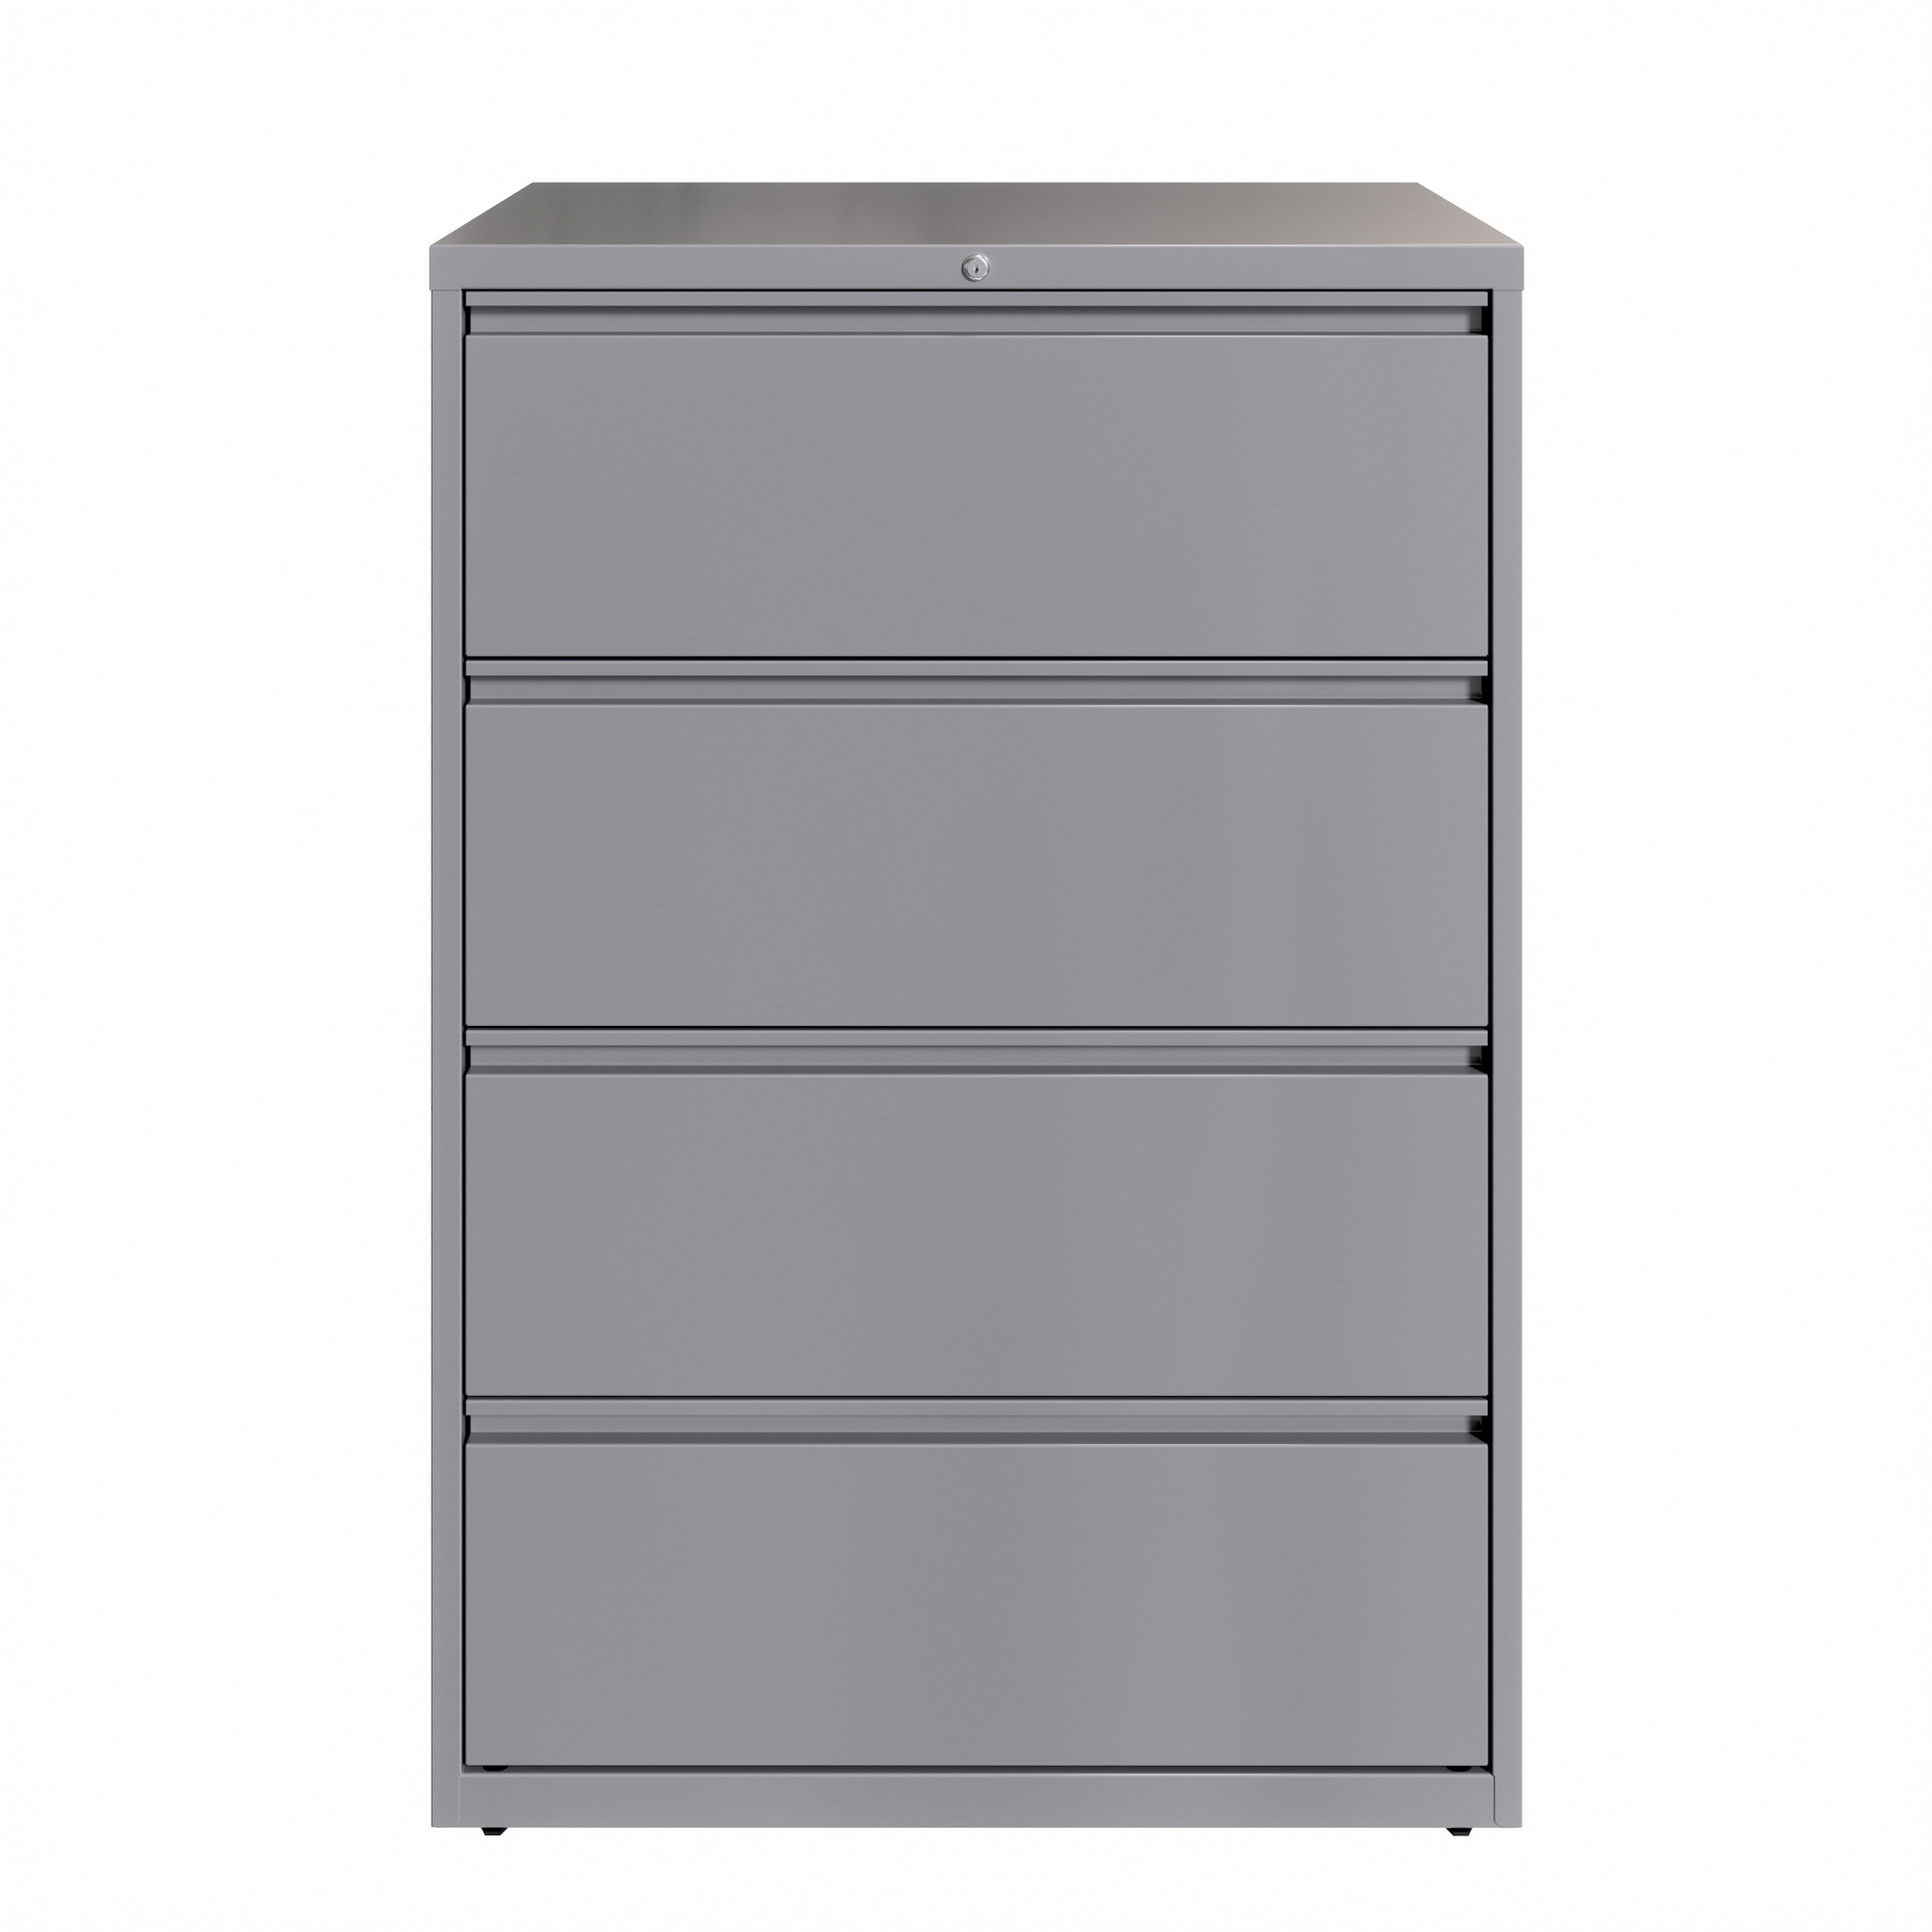 Hirsh Industries, 4 Drawer Lateral File Cabinet, Width 36 in, Depth 18.625 in, Height 52.5 in, Model 23746